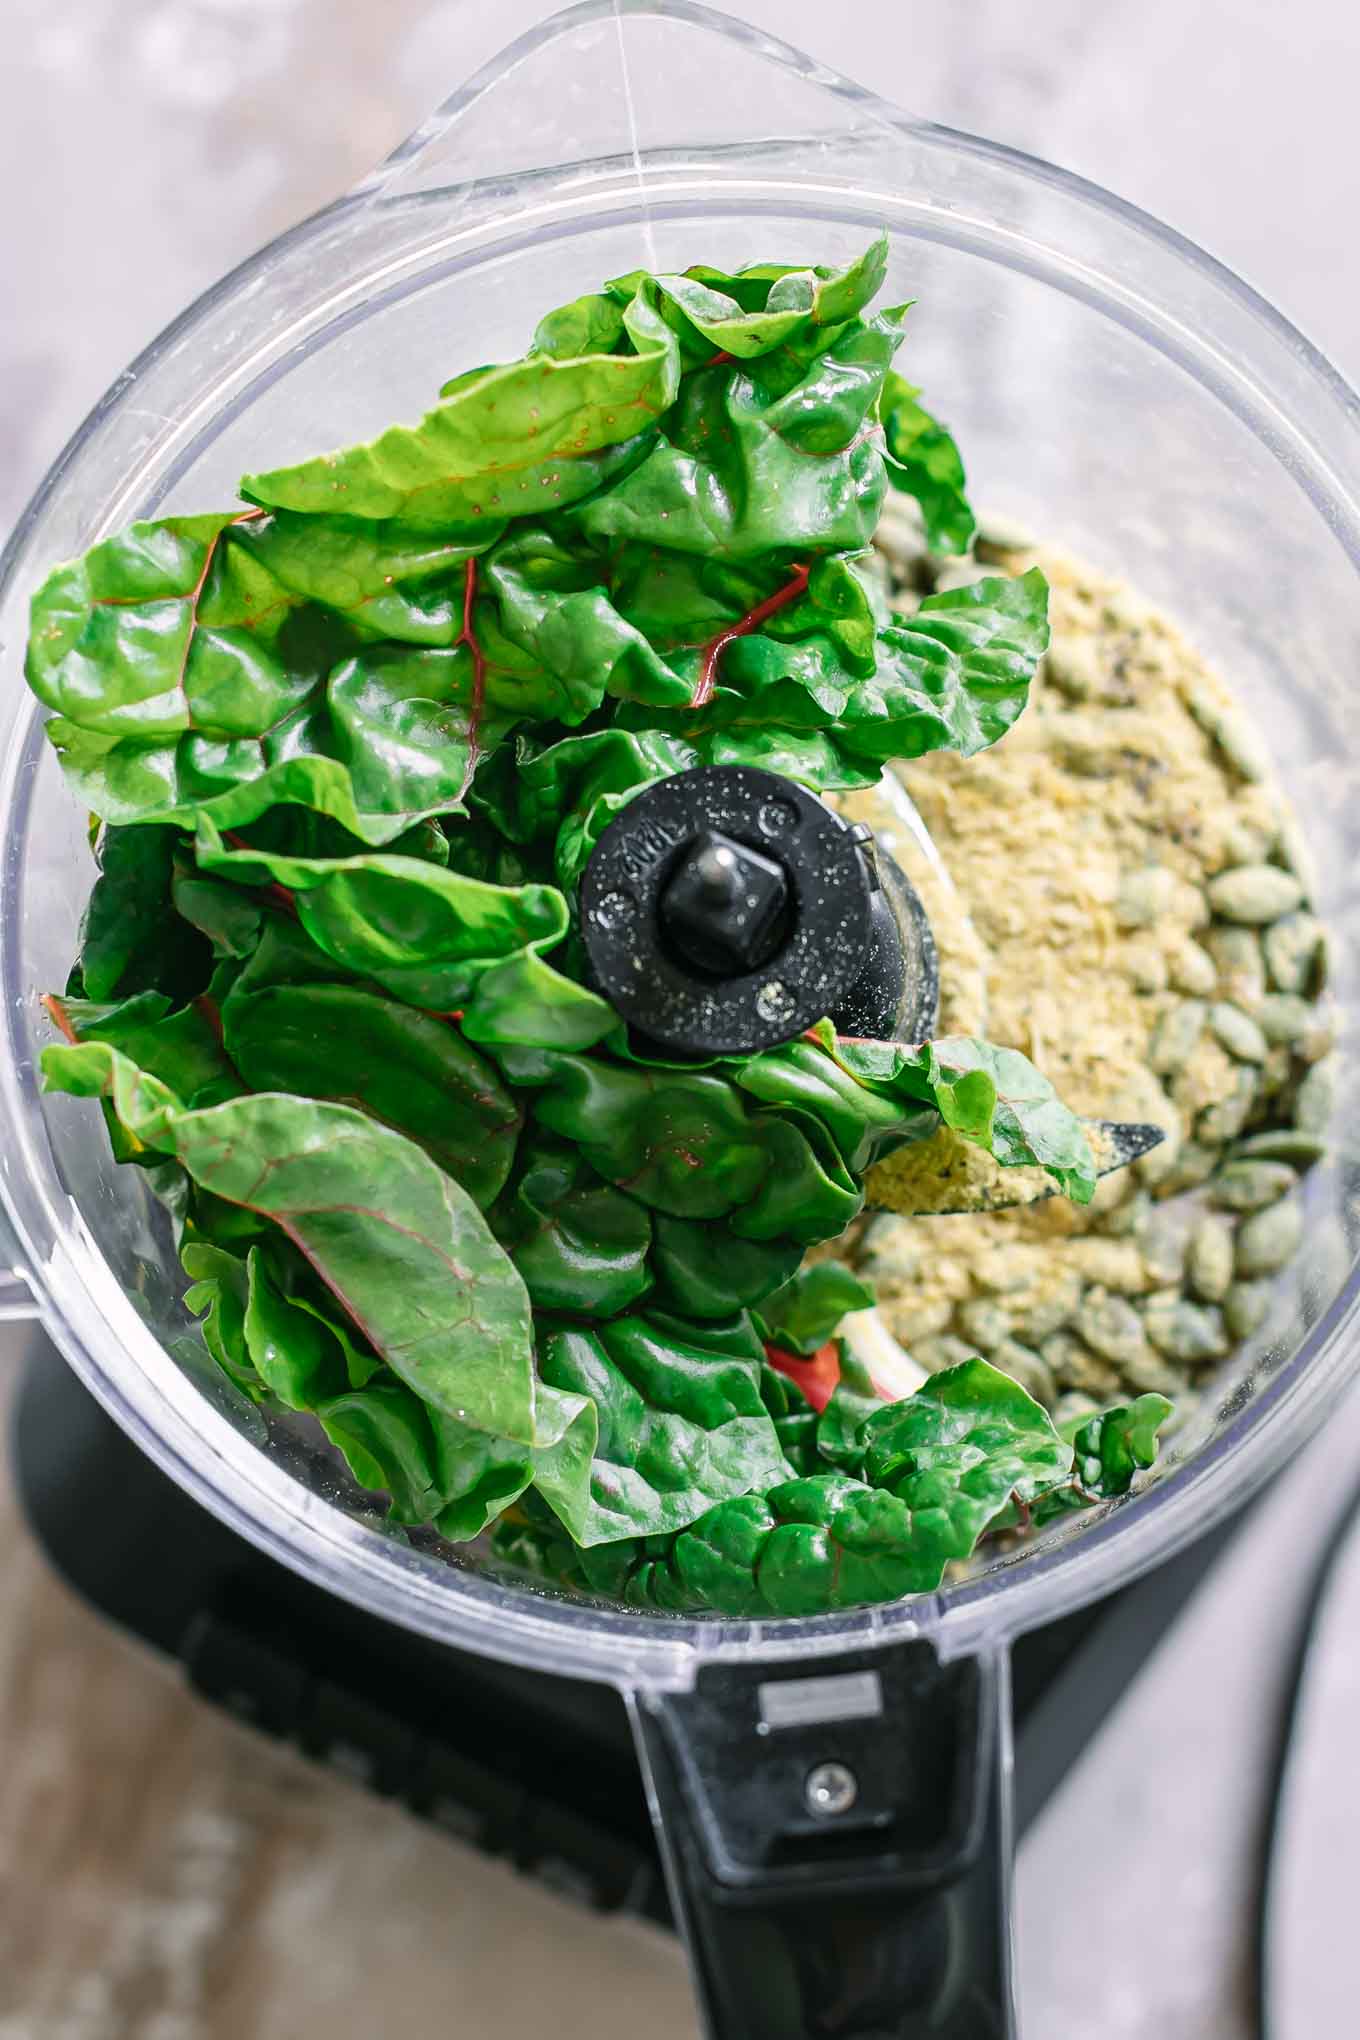 fresh chard leaves and pesto ingredients in a food processor before blending